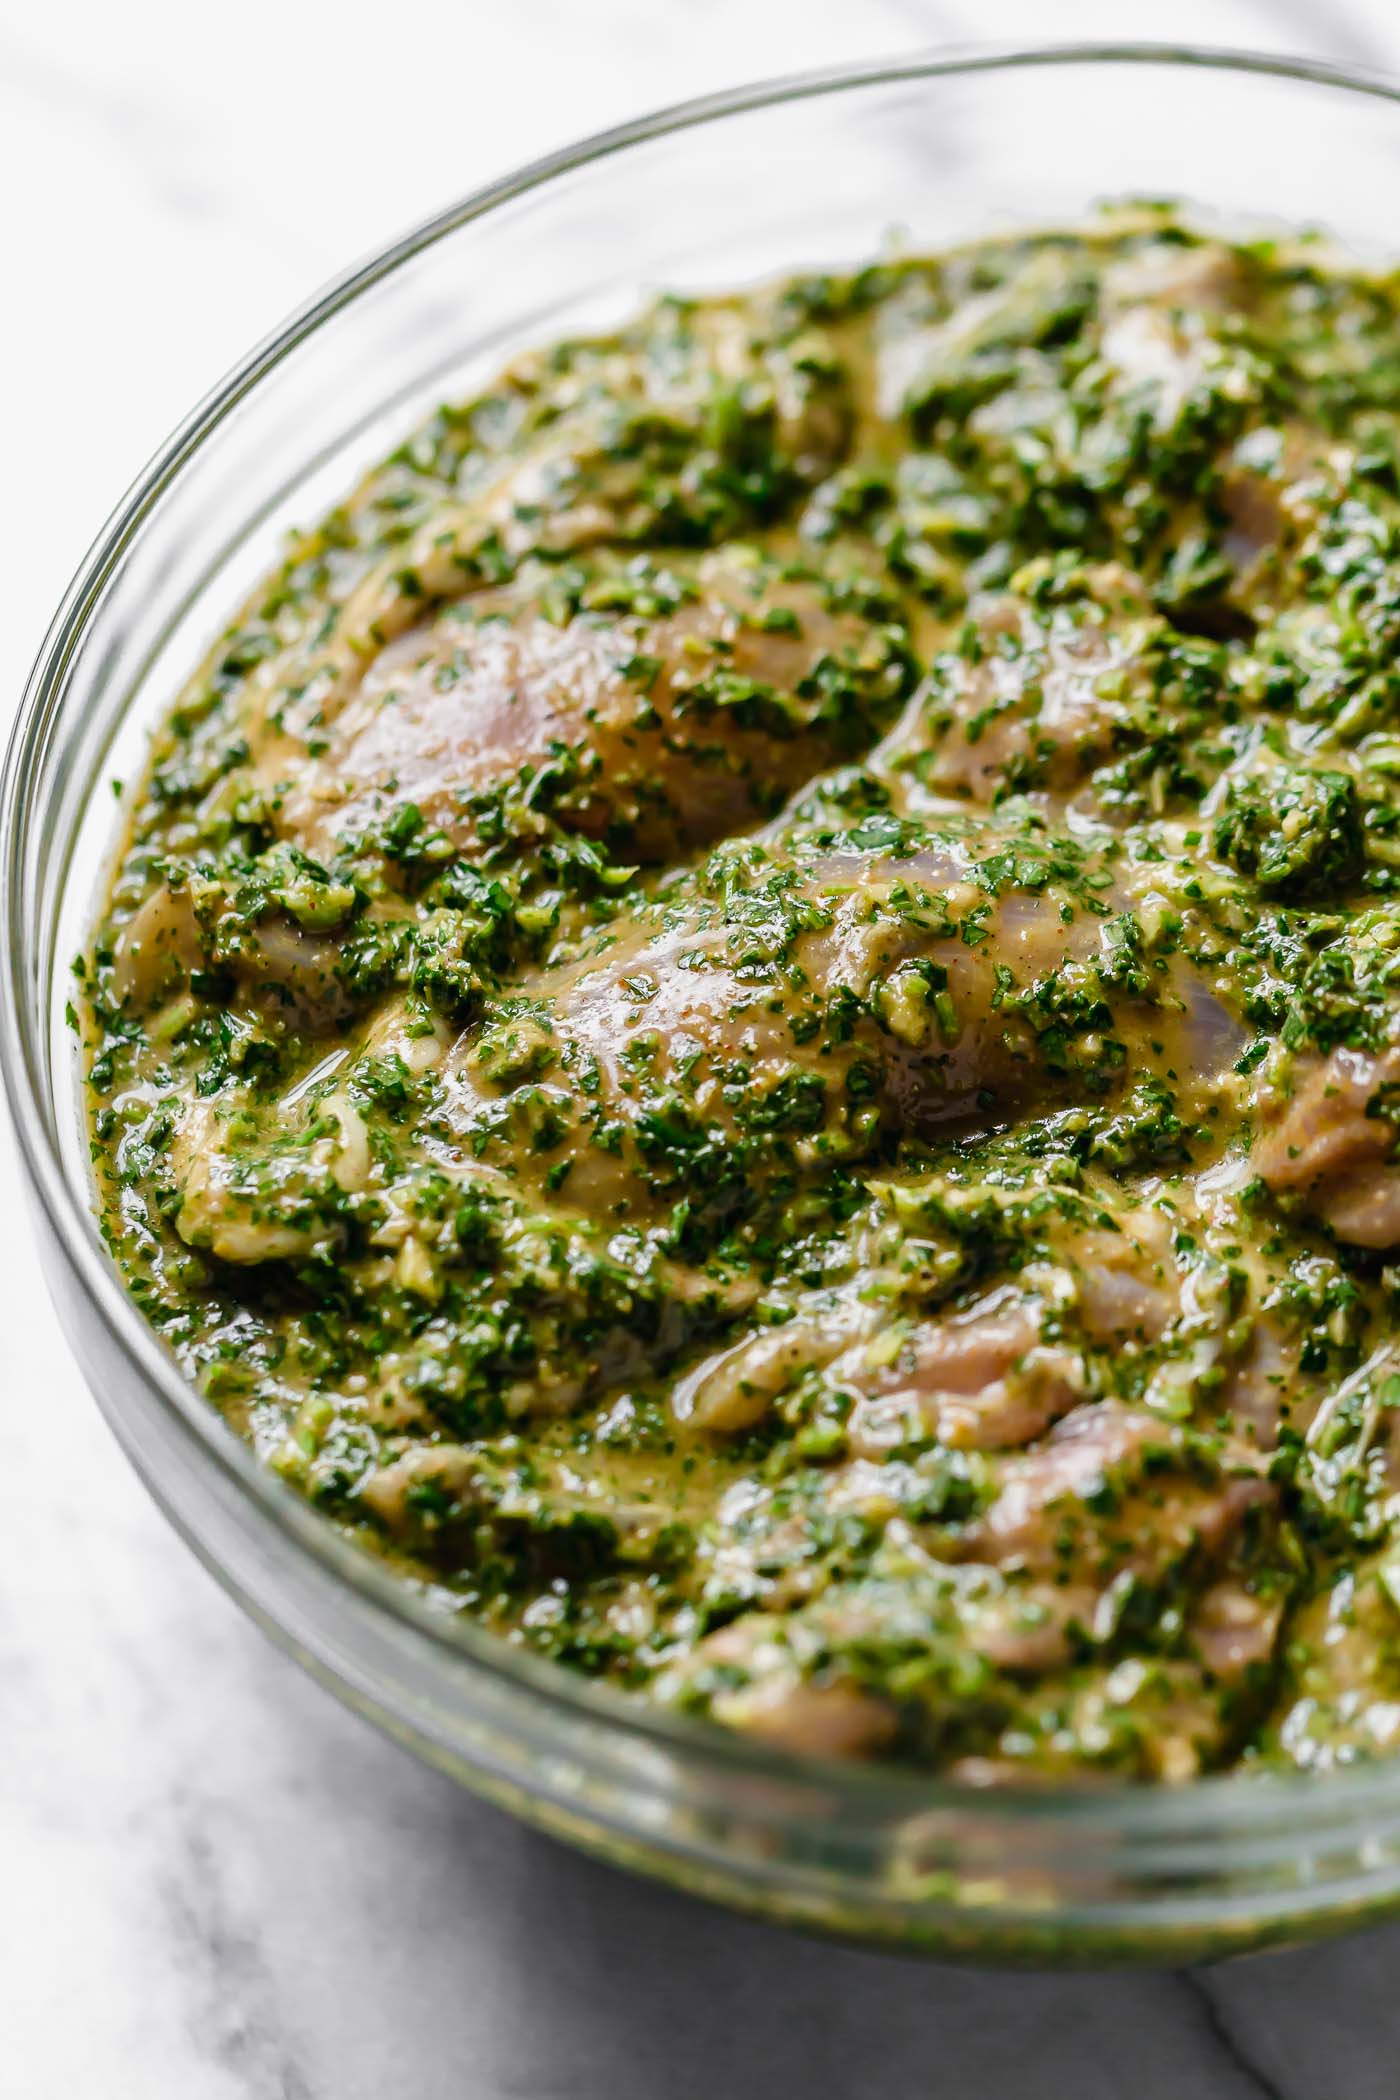 Similar to chimichurri, chermoula is packed with garlic & punchy fresh herbs (like cilantro, parsley, mint), but it also has a hint of warmth from spices common in North African & Middle Eastern cooking (cumin & coriander ftw!). It’s traditionally served over grilled fish...but I’m pretty sure once you have it you’ll want to put it on everythaaang. #playswellwithbutter #chermoula #chermoulasauce #morrocanfood #morrocanrecipes #marinaderecipe #easymarinade #grillingrecipes #chickenmarinade